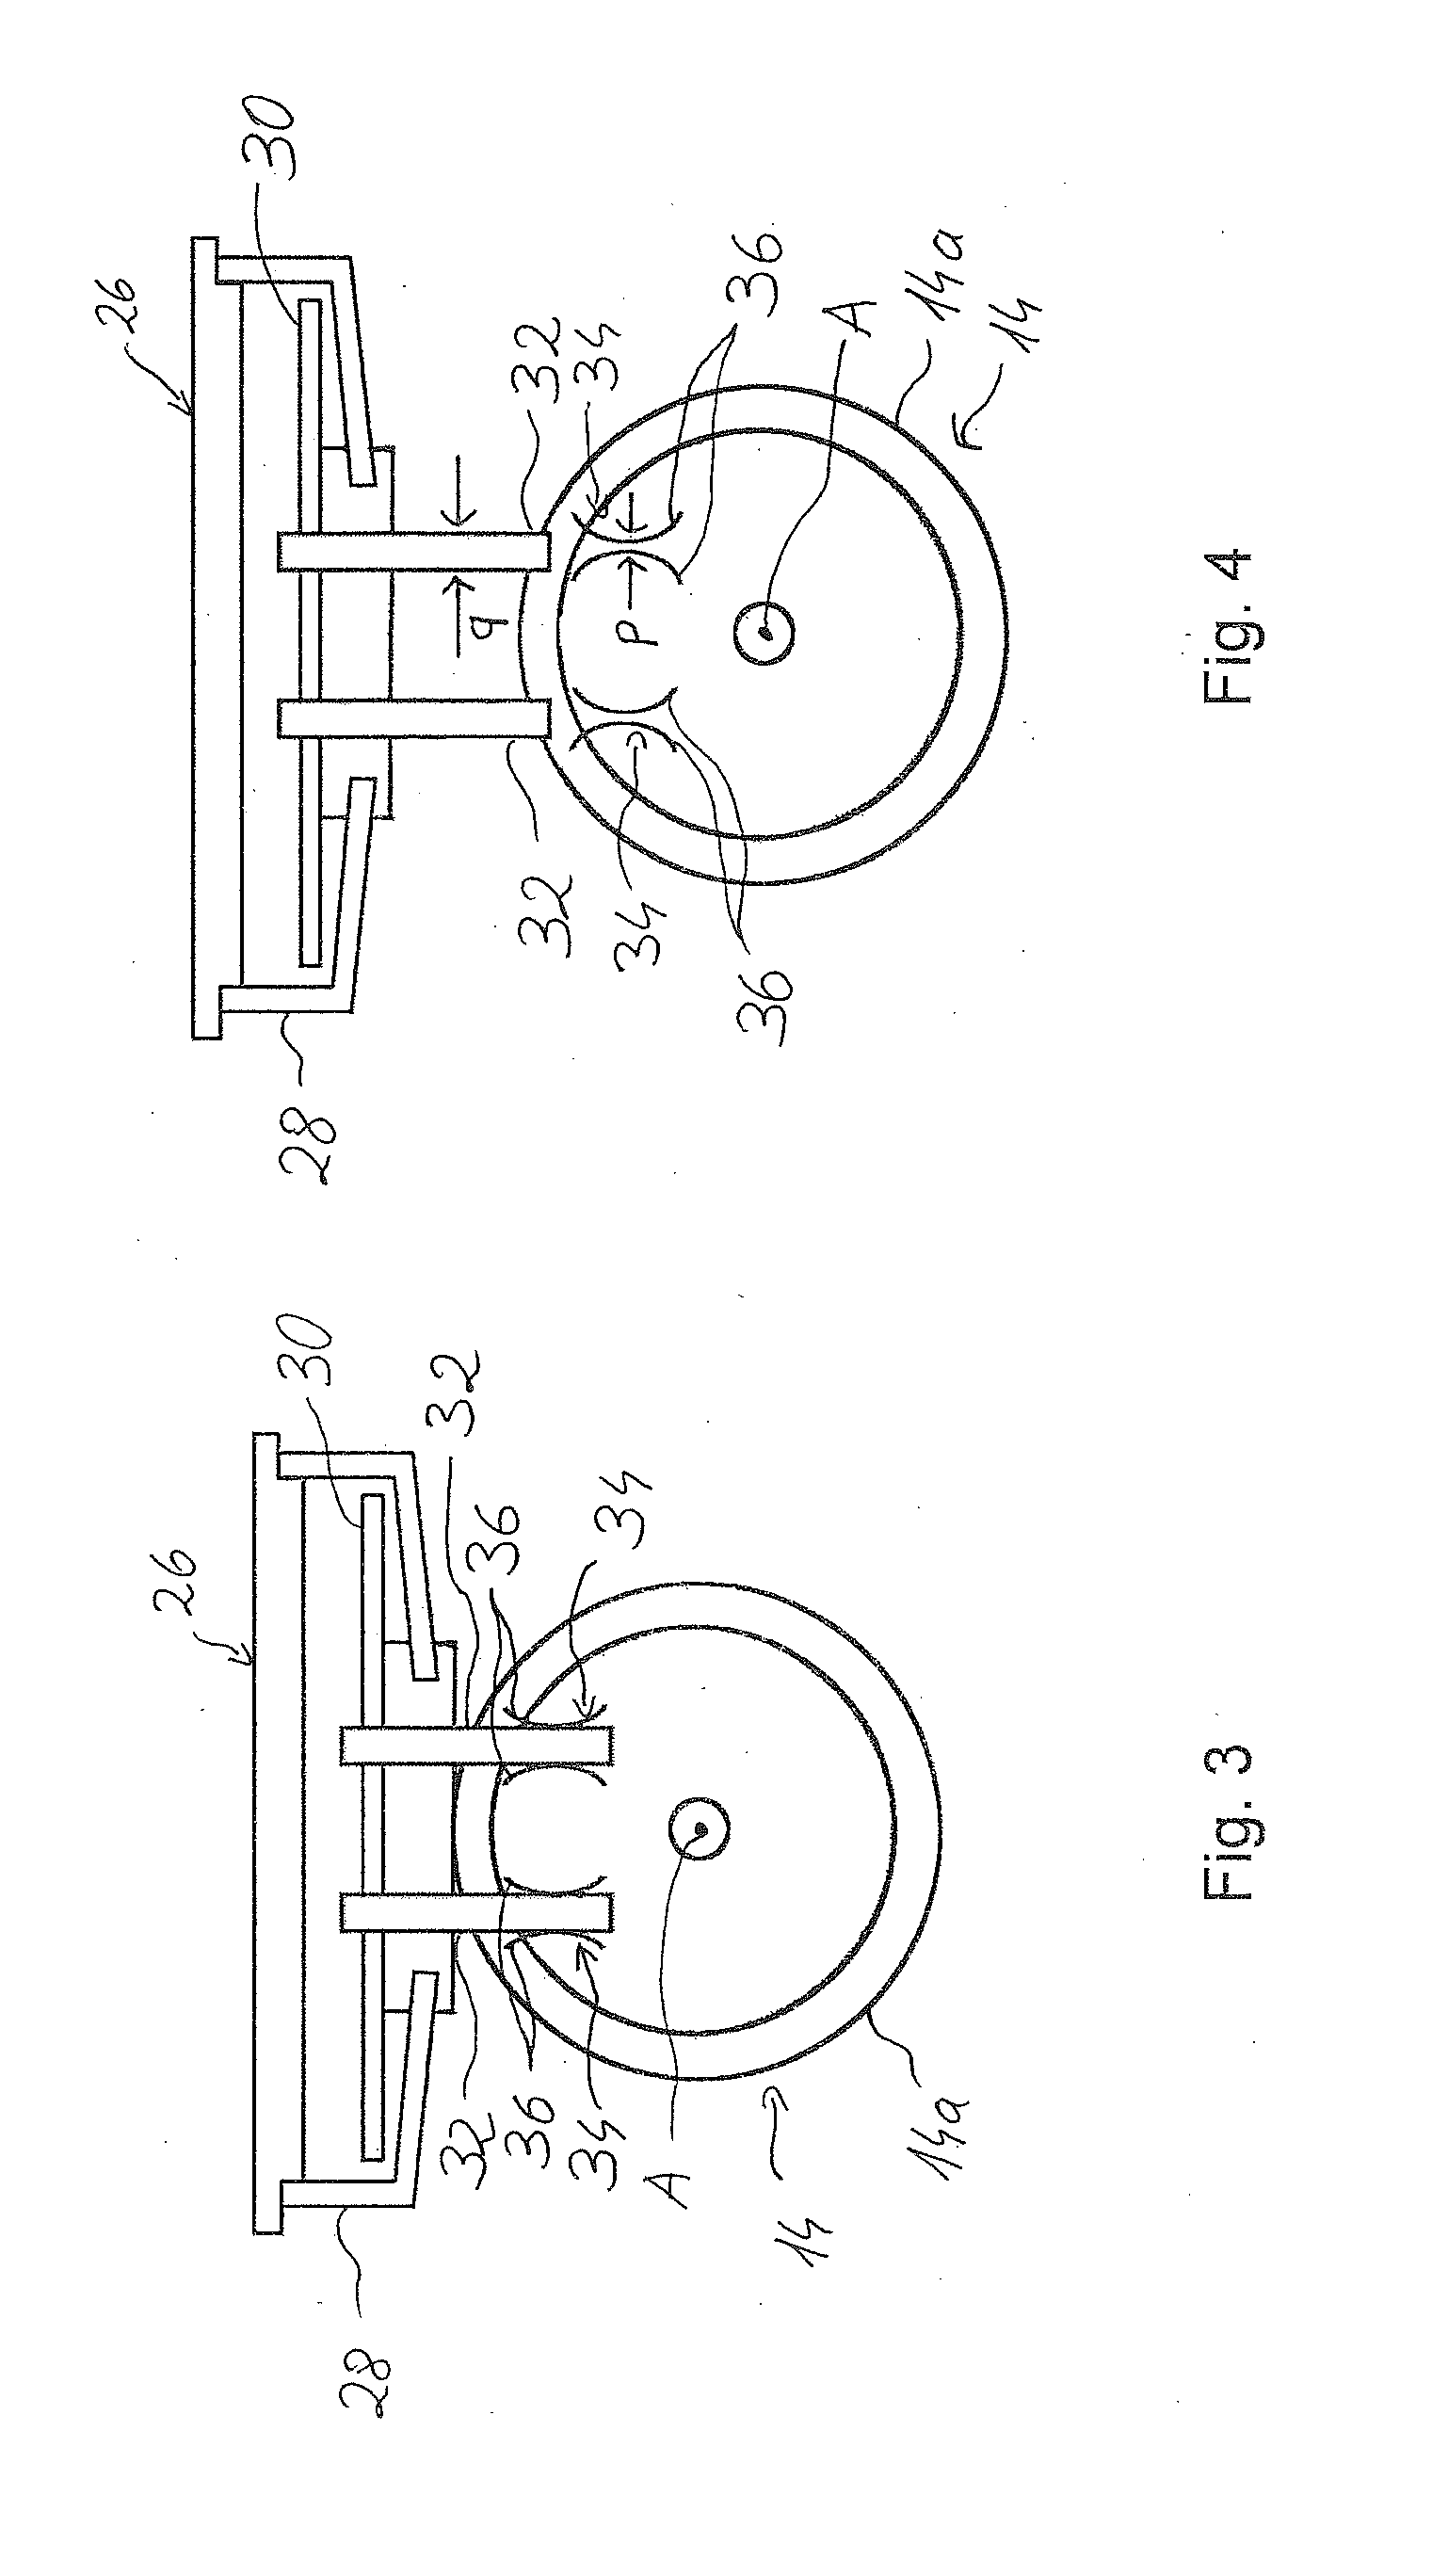 Air feed blower, especially for a vehicle heater